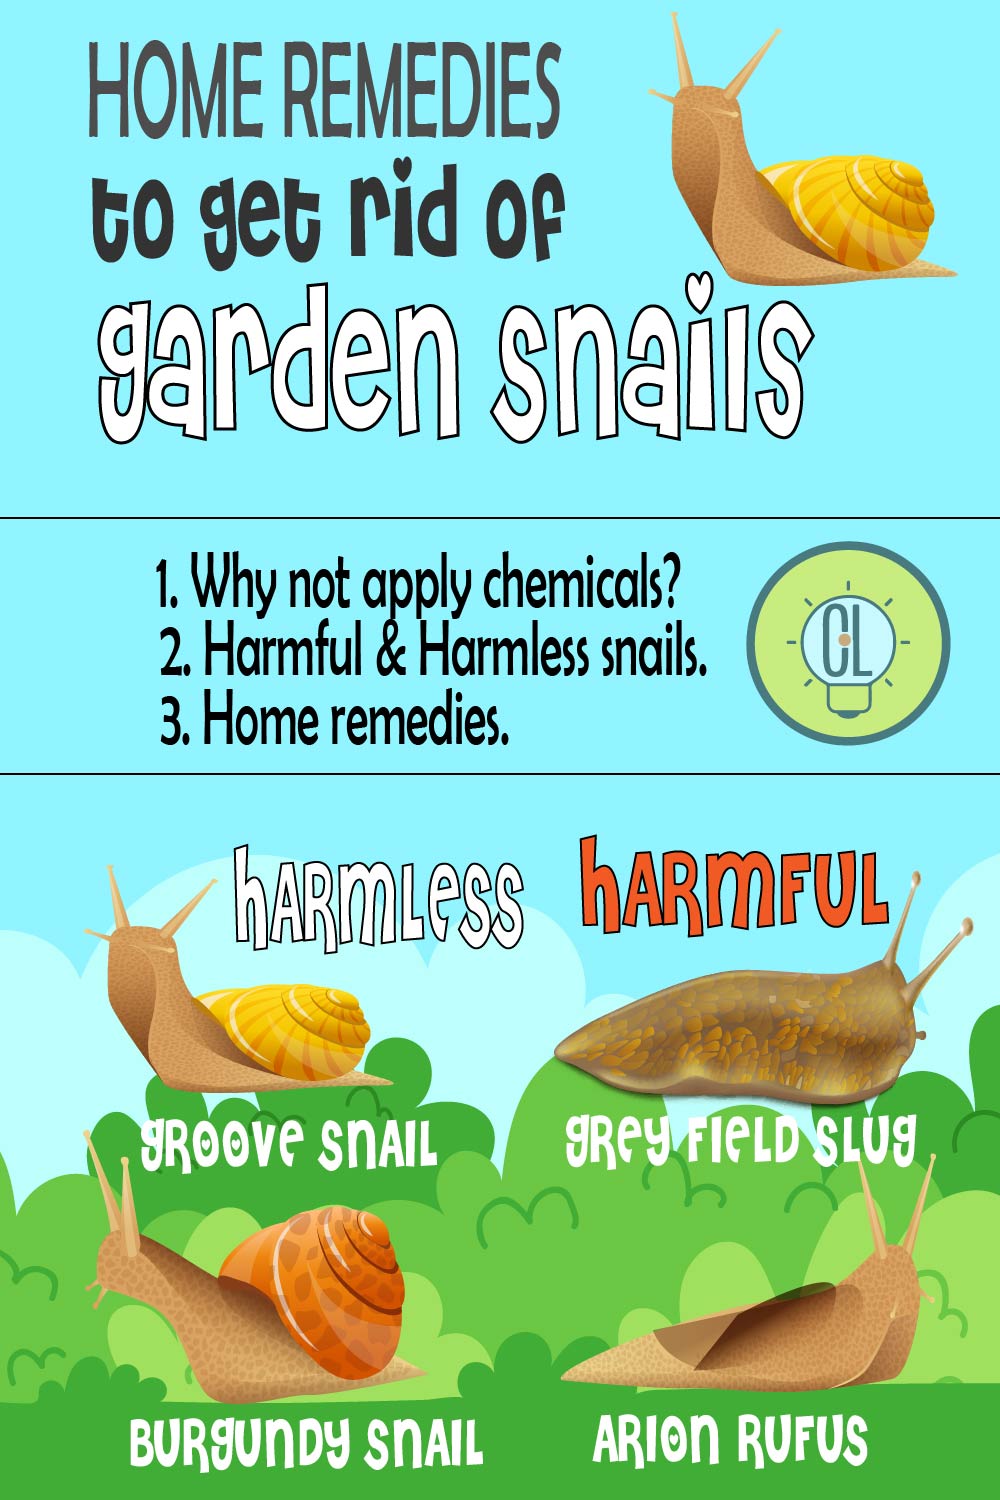 HOW TO GET RID OF GARDEN SNAILS HOME REMEDIES2-01